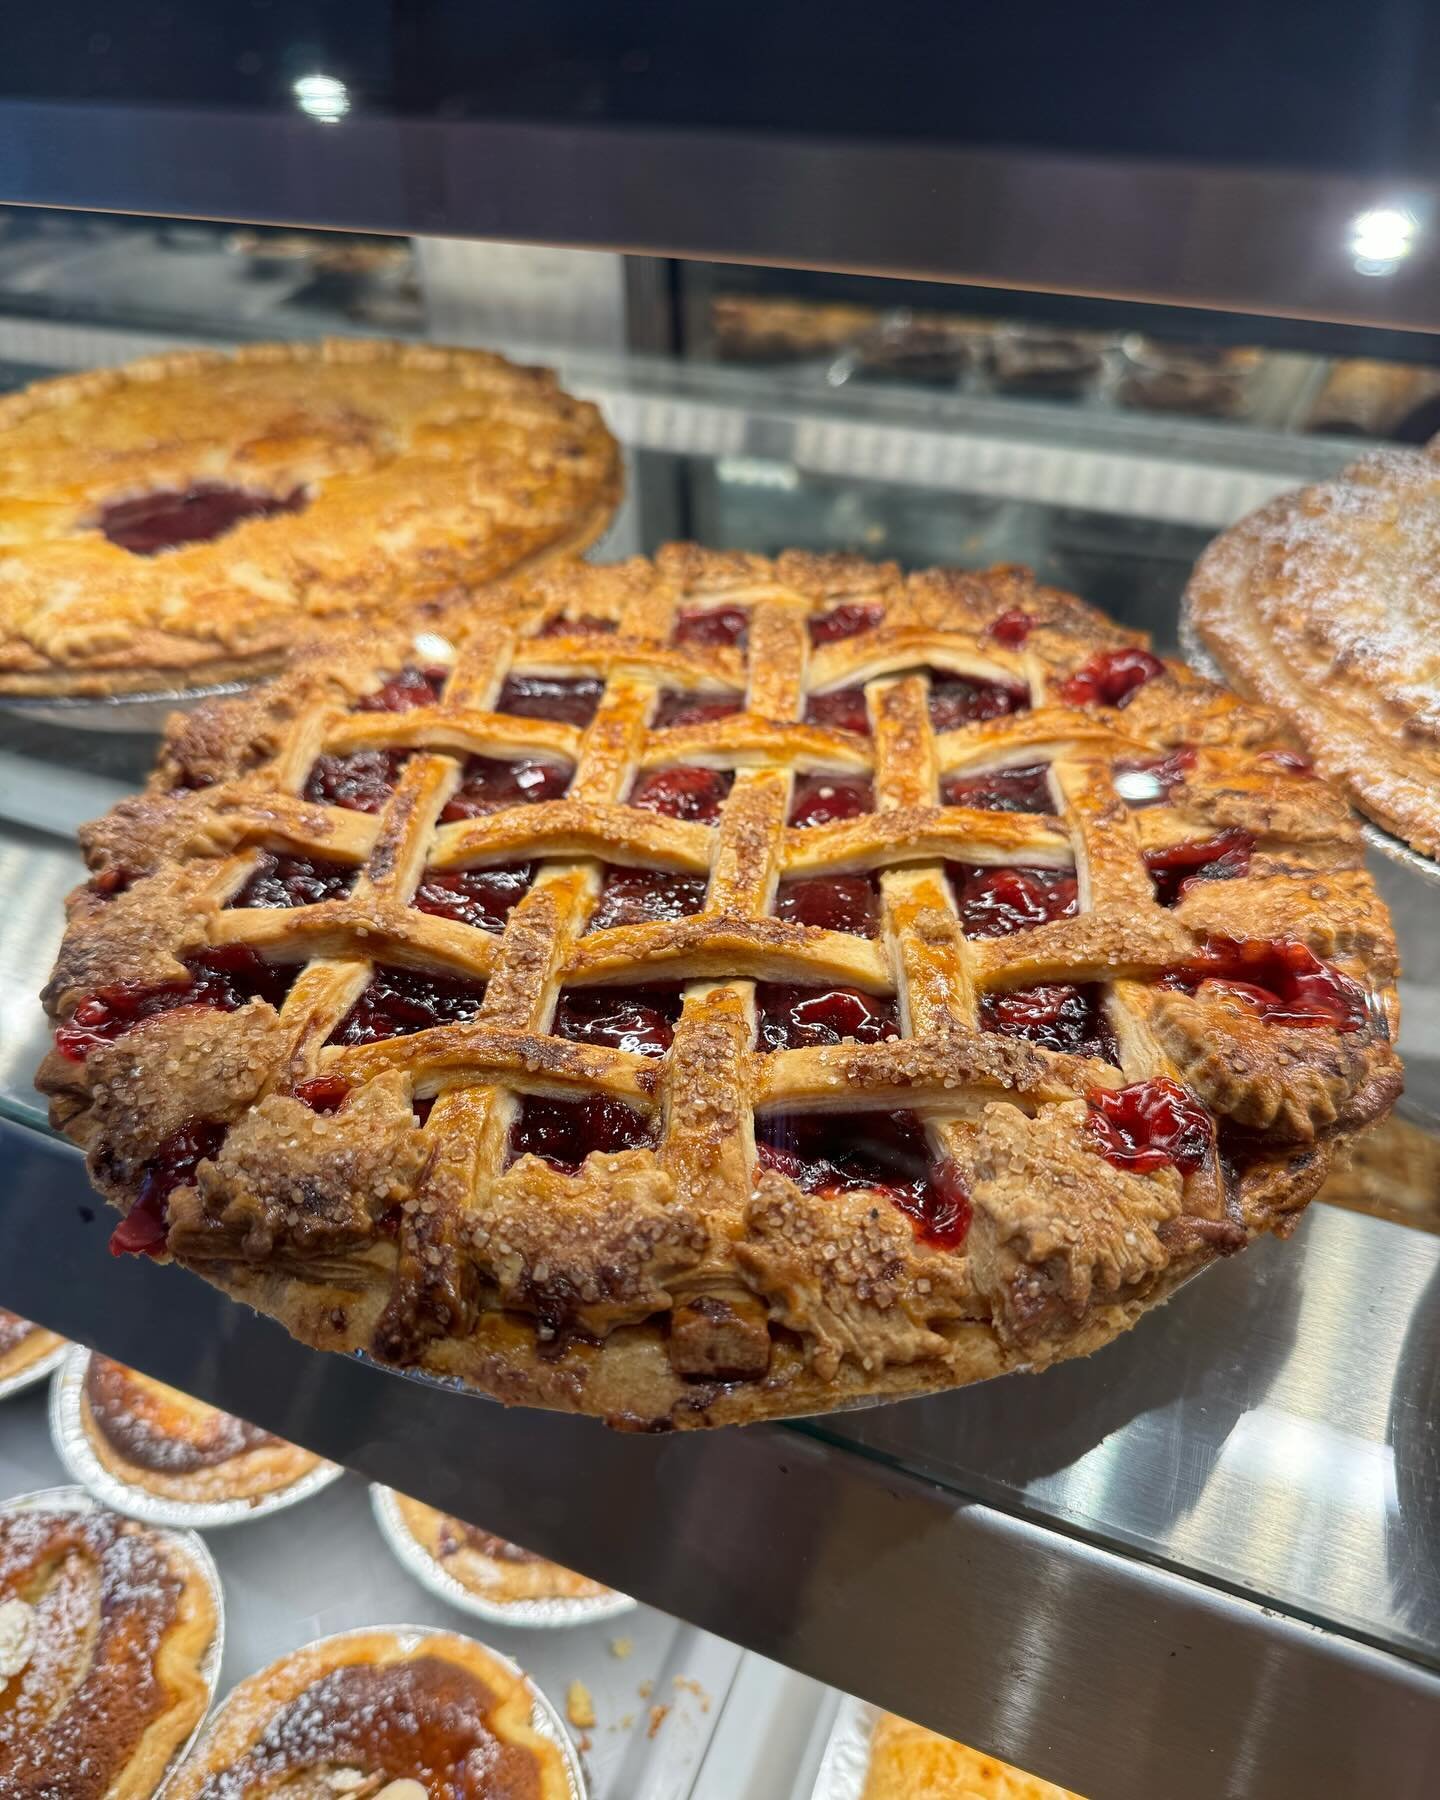 Just another shot of our large size pies available today! Pictured is our Sour Cherry with a gorgeous lattice crust! We&rsquo;re open today 10am to 5pm! 🍒 🥧 

Reminder our storefront is open during road construction and parking is now available alo